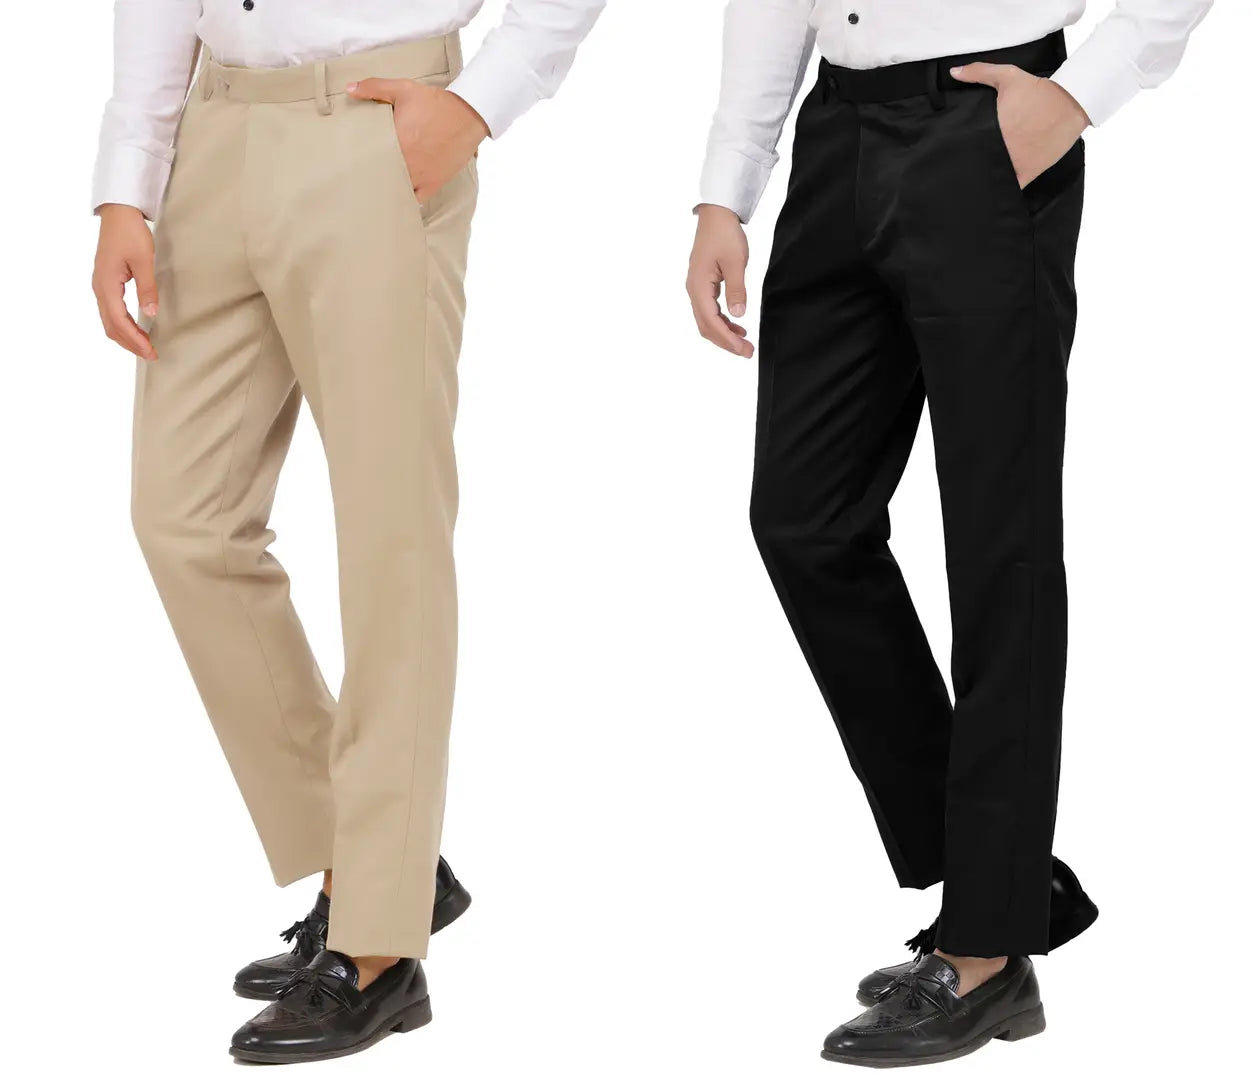 Kundan Men Poly-Viscose Blended Beige and Black Formal Trousers ( Pack of 2 Trousers )